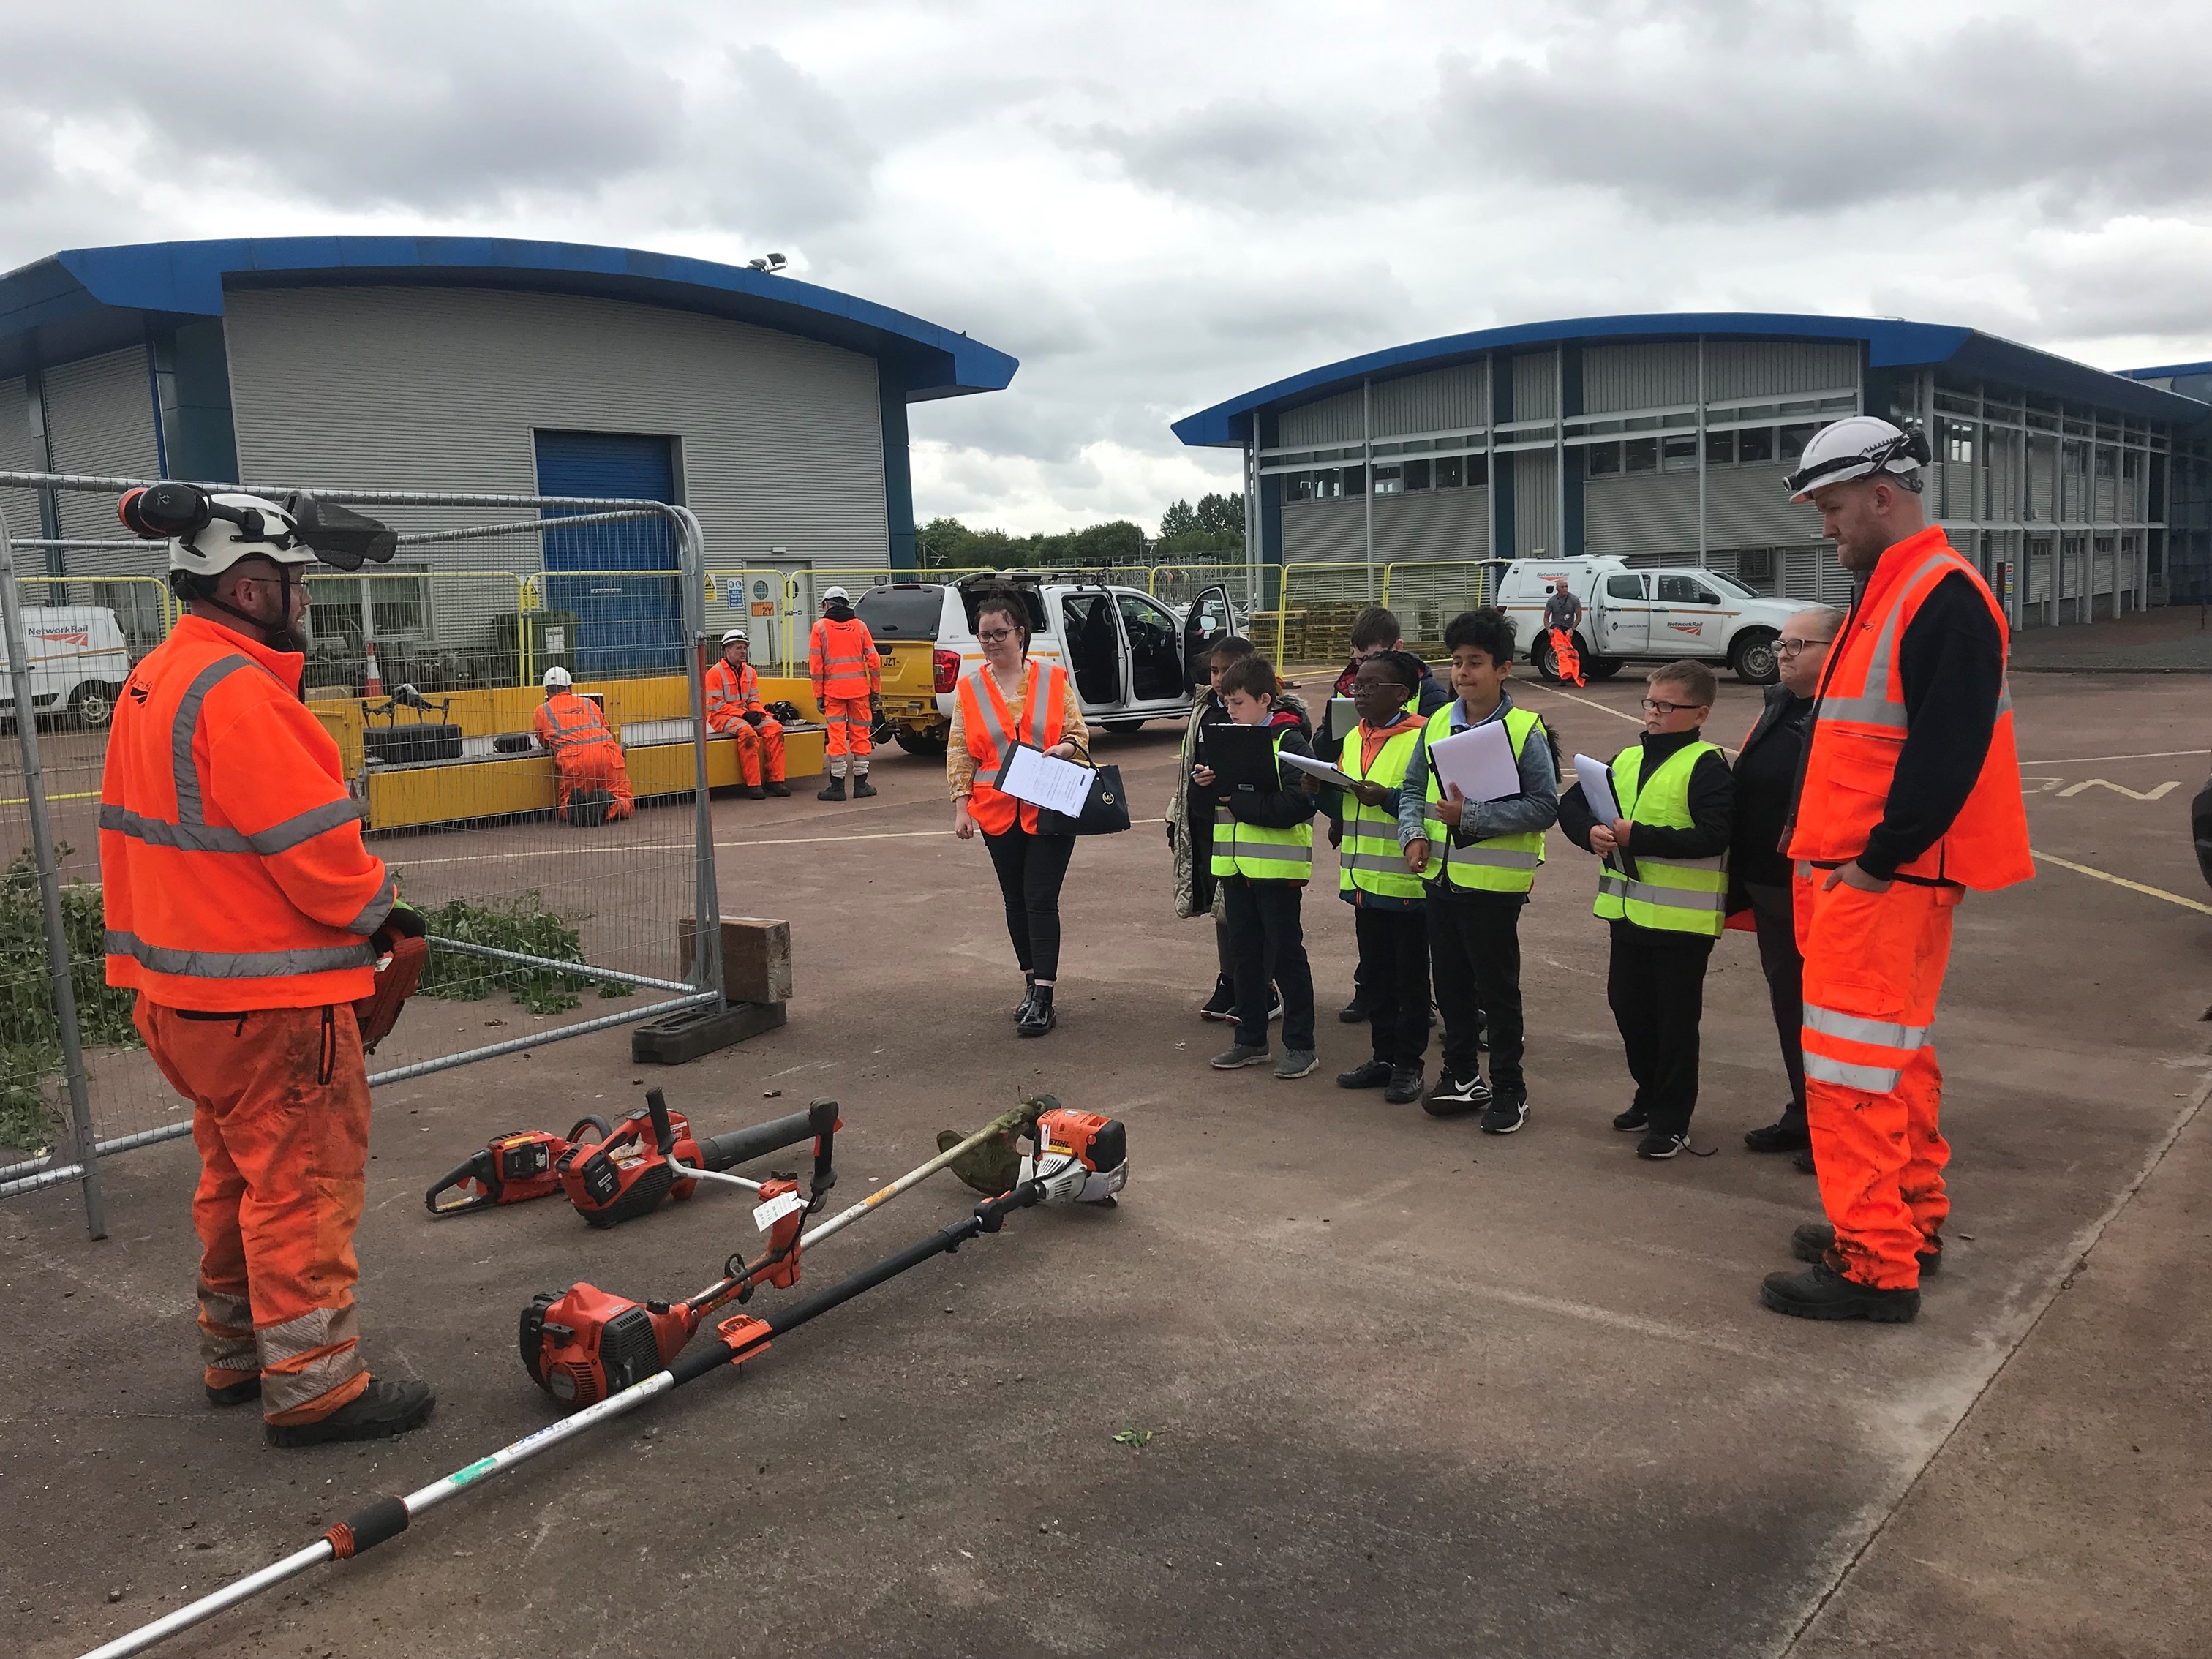 St Roch's primary pupils saw equipment demonstrations at Glasgow MDU